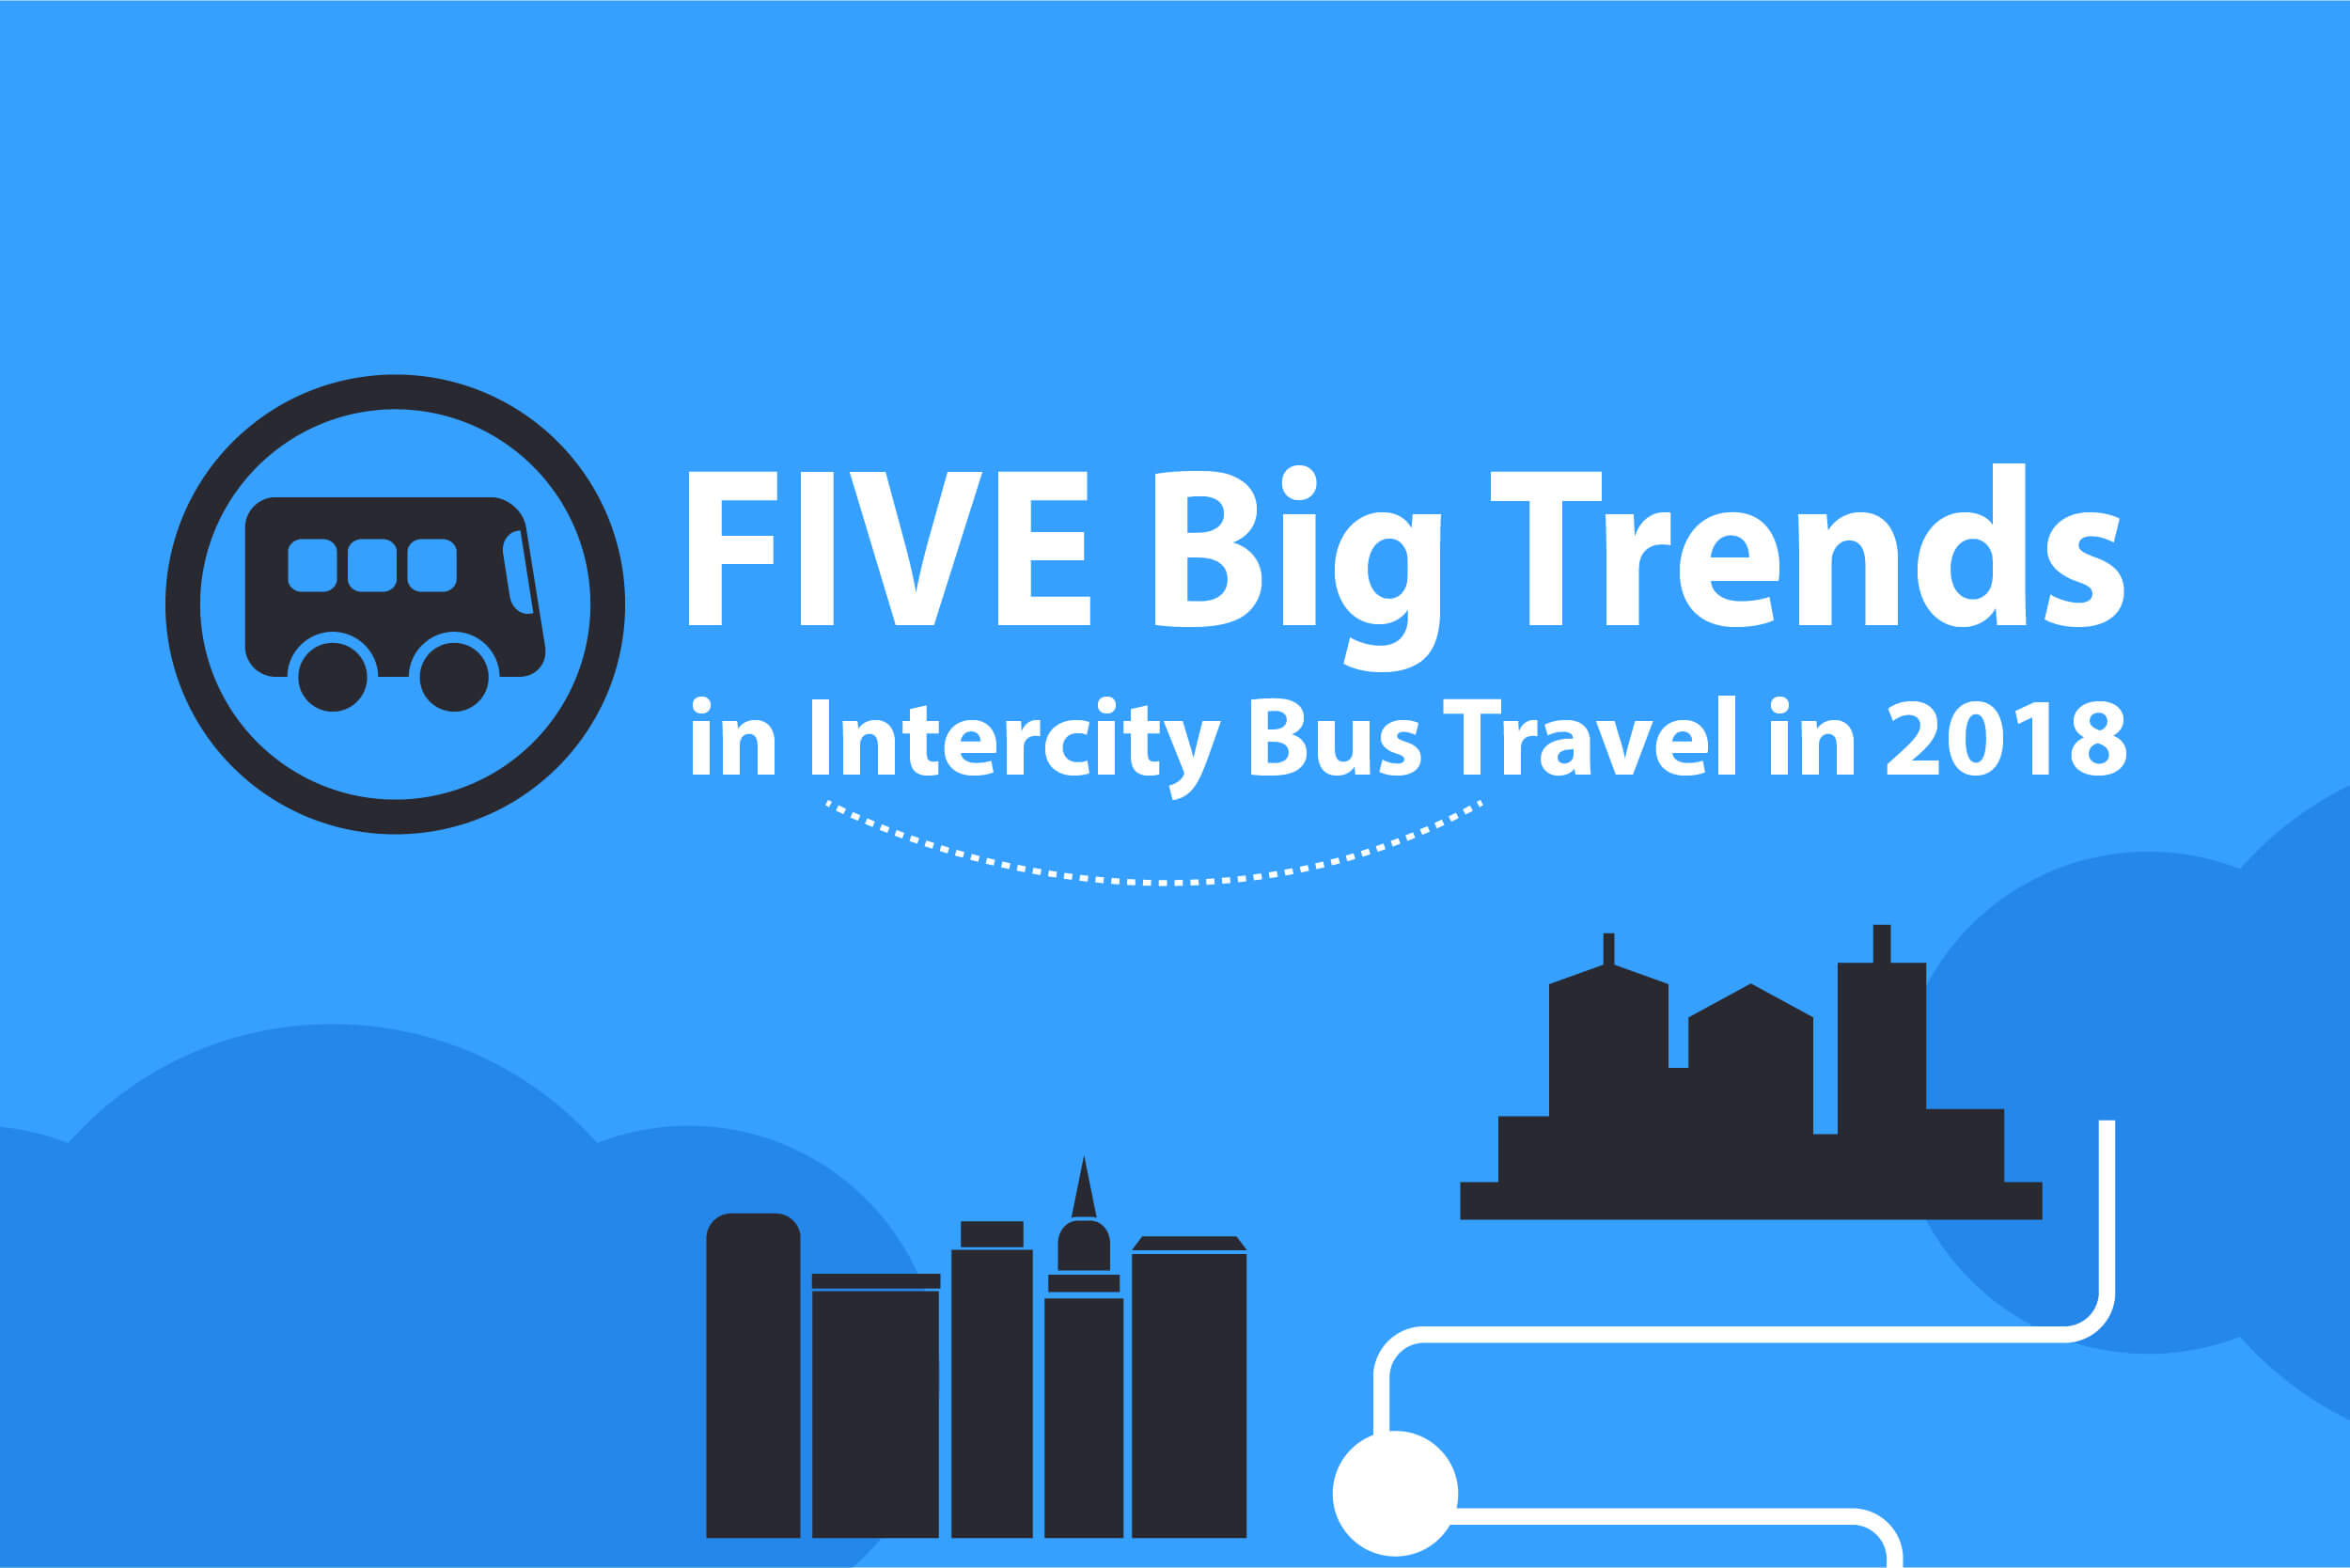 US intercity bus travel trend in 2018